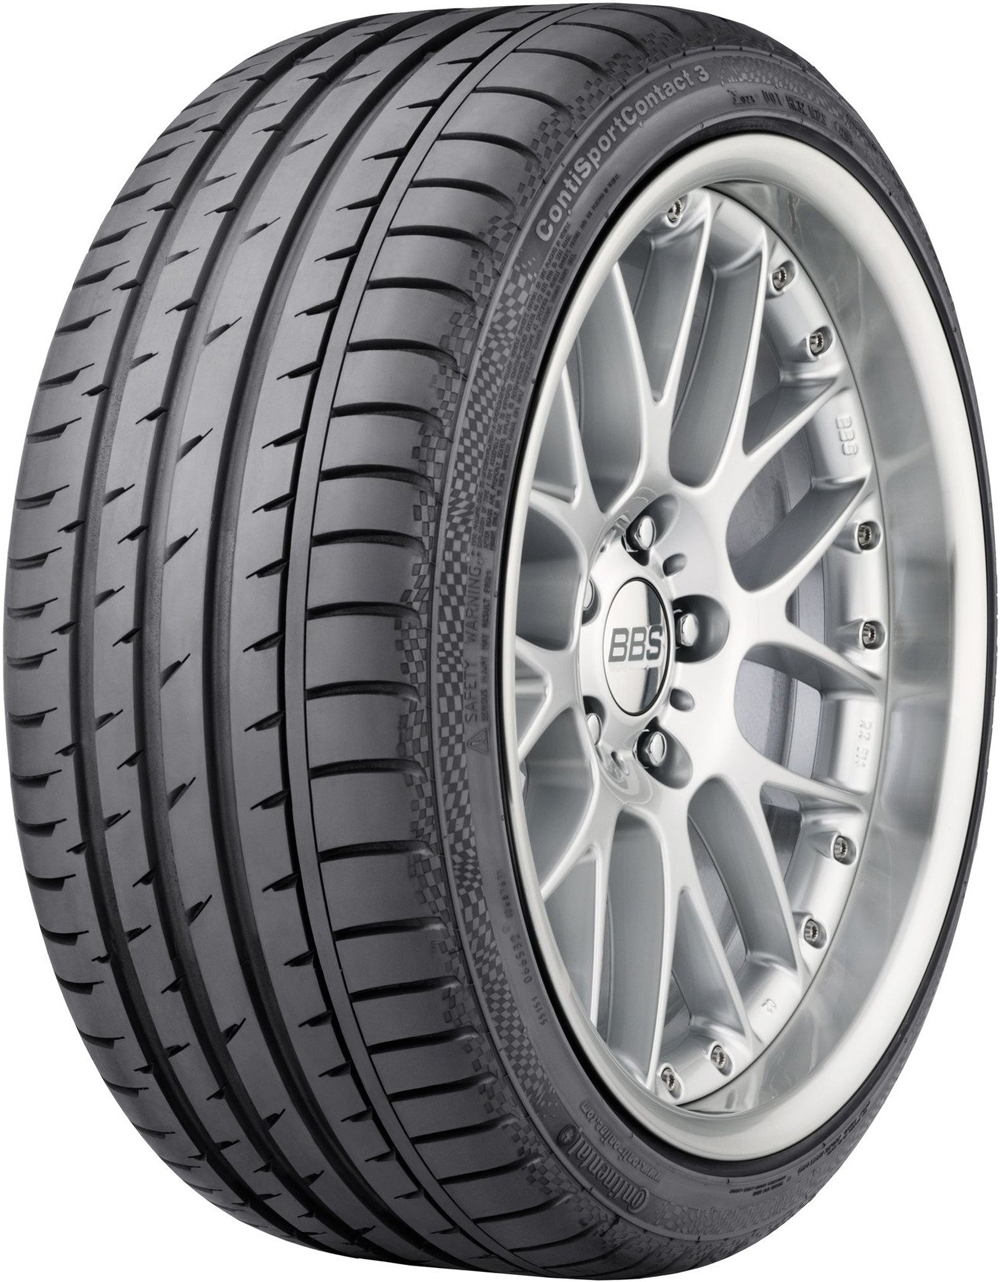 Anvelope jeep CONTINENTAL ContiSportContact 3 SSR * RFT BMW 275/40 R19 101W